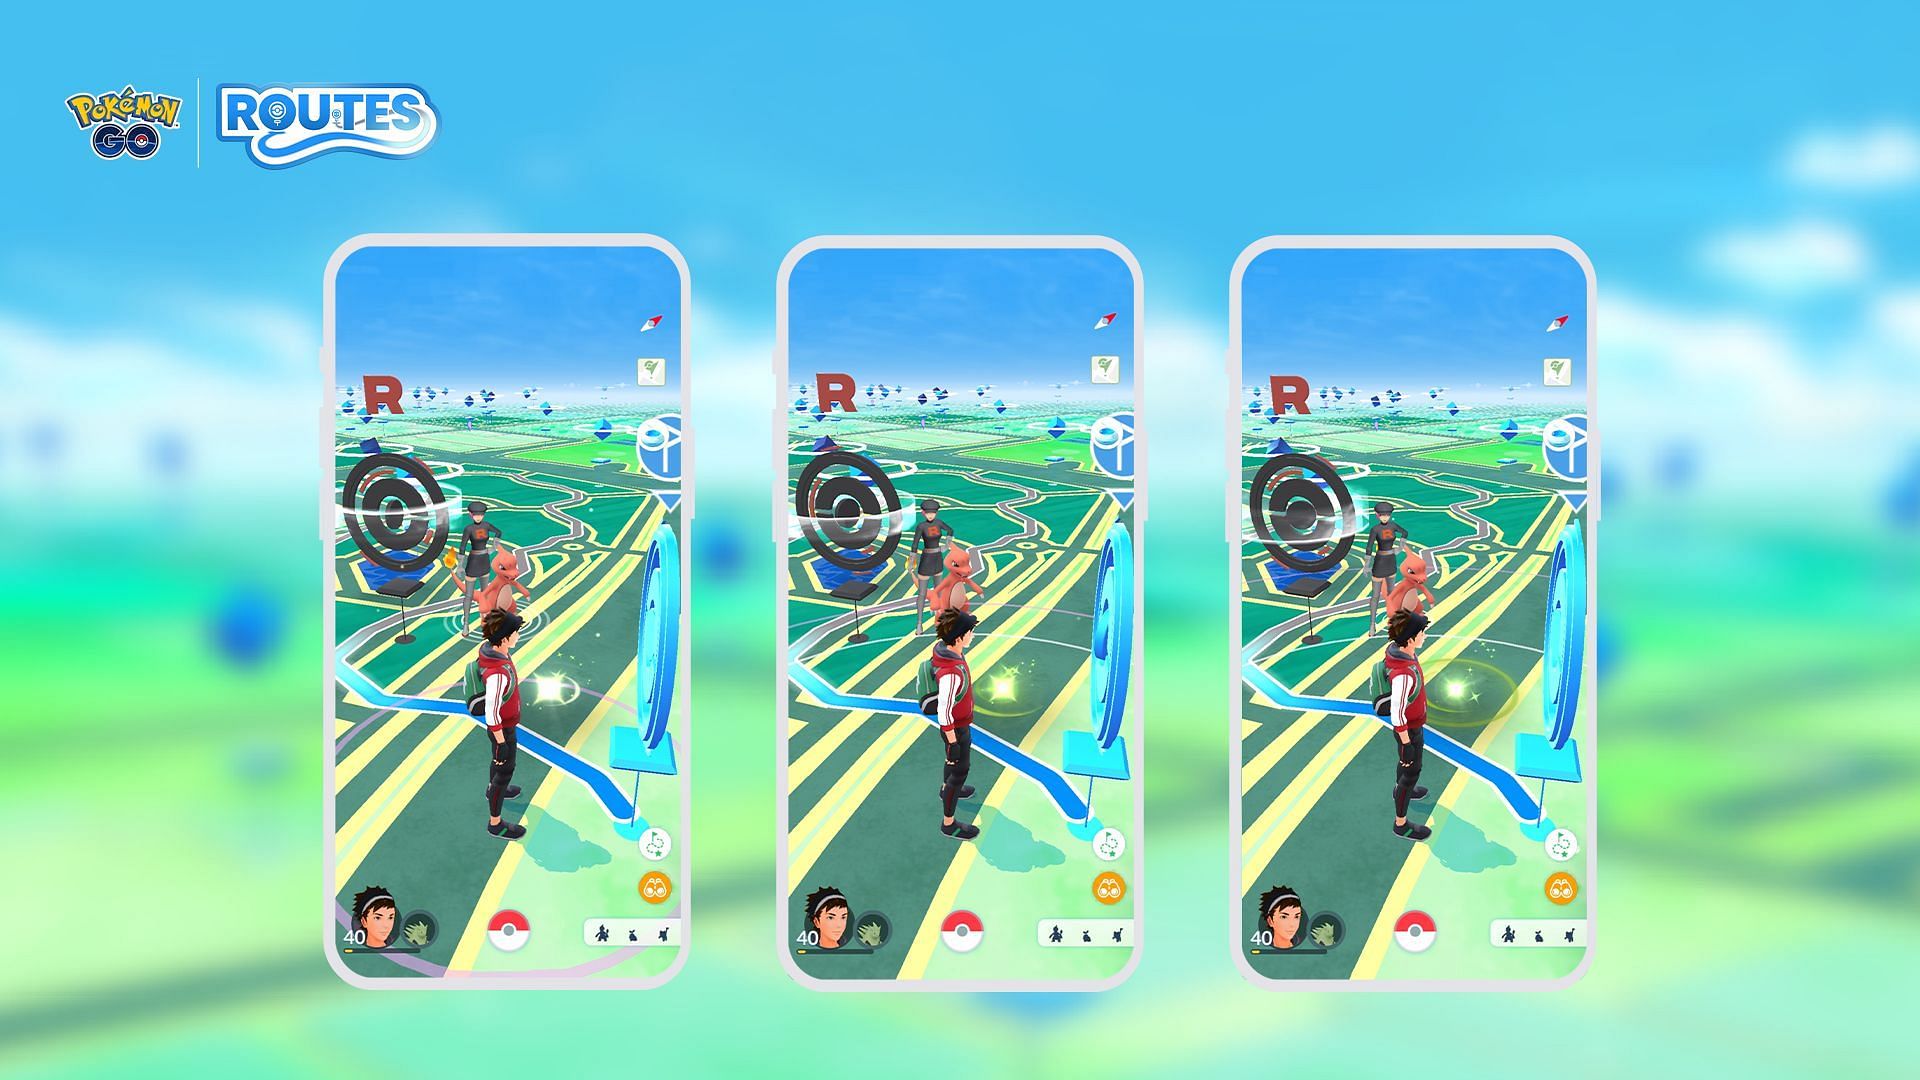 Pokemon GO&#039;s new Routes feature will allow you to find Zygarde Cells in the environment (Image via Niantic)